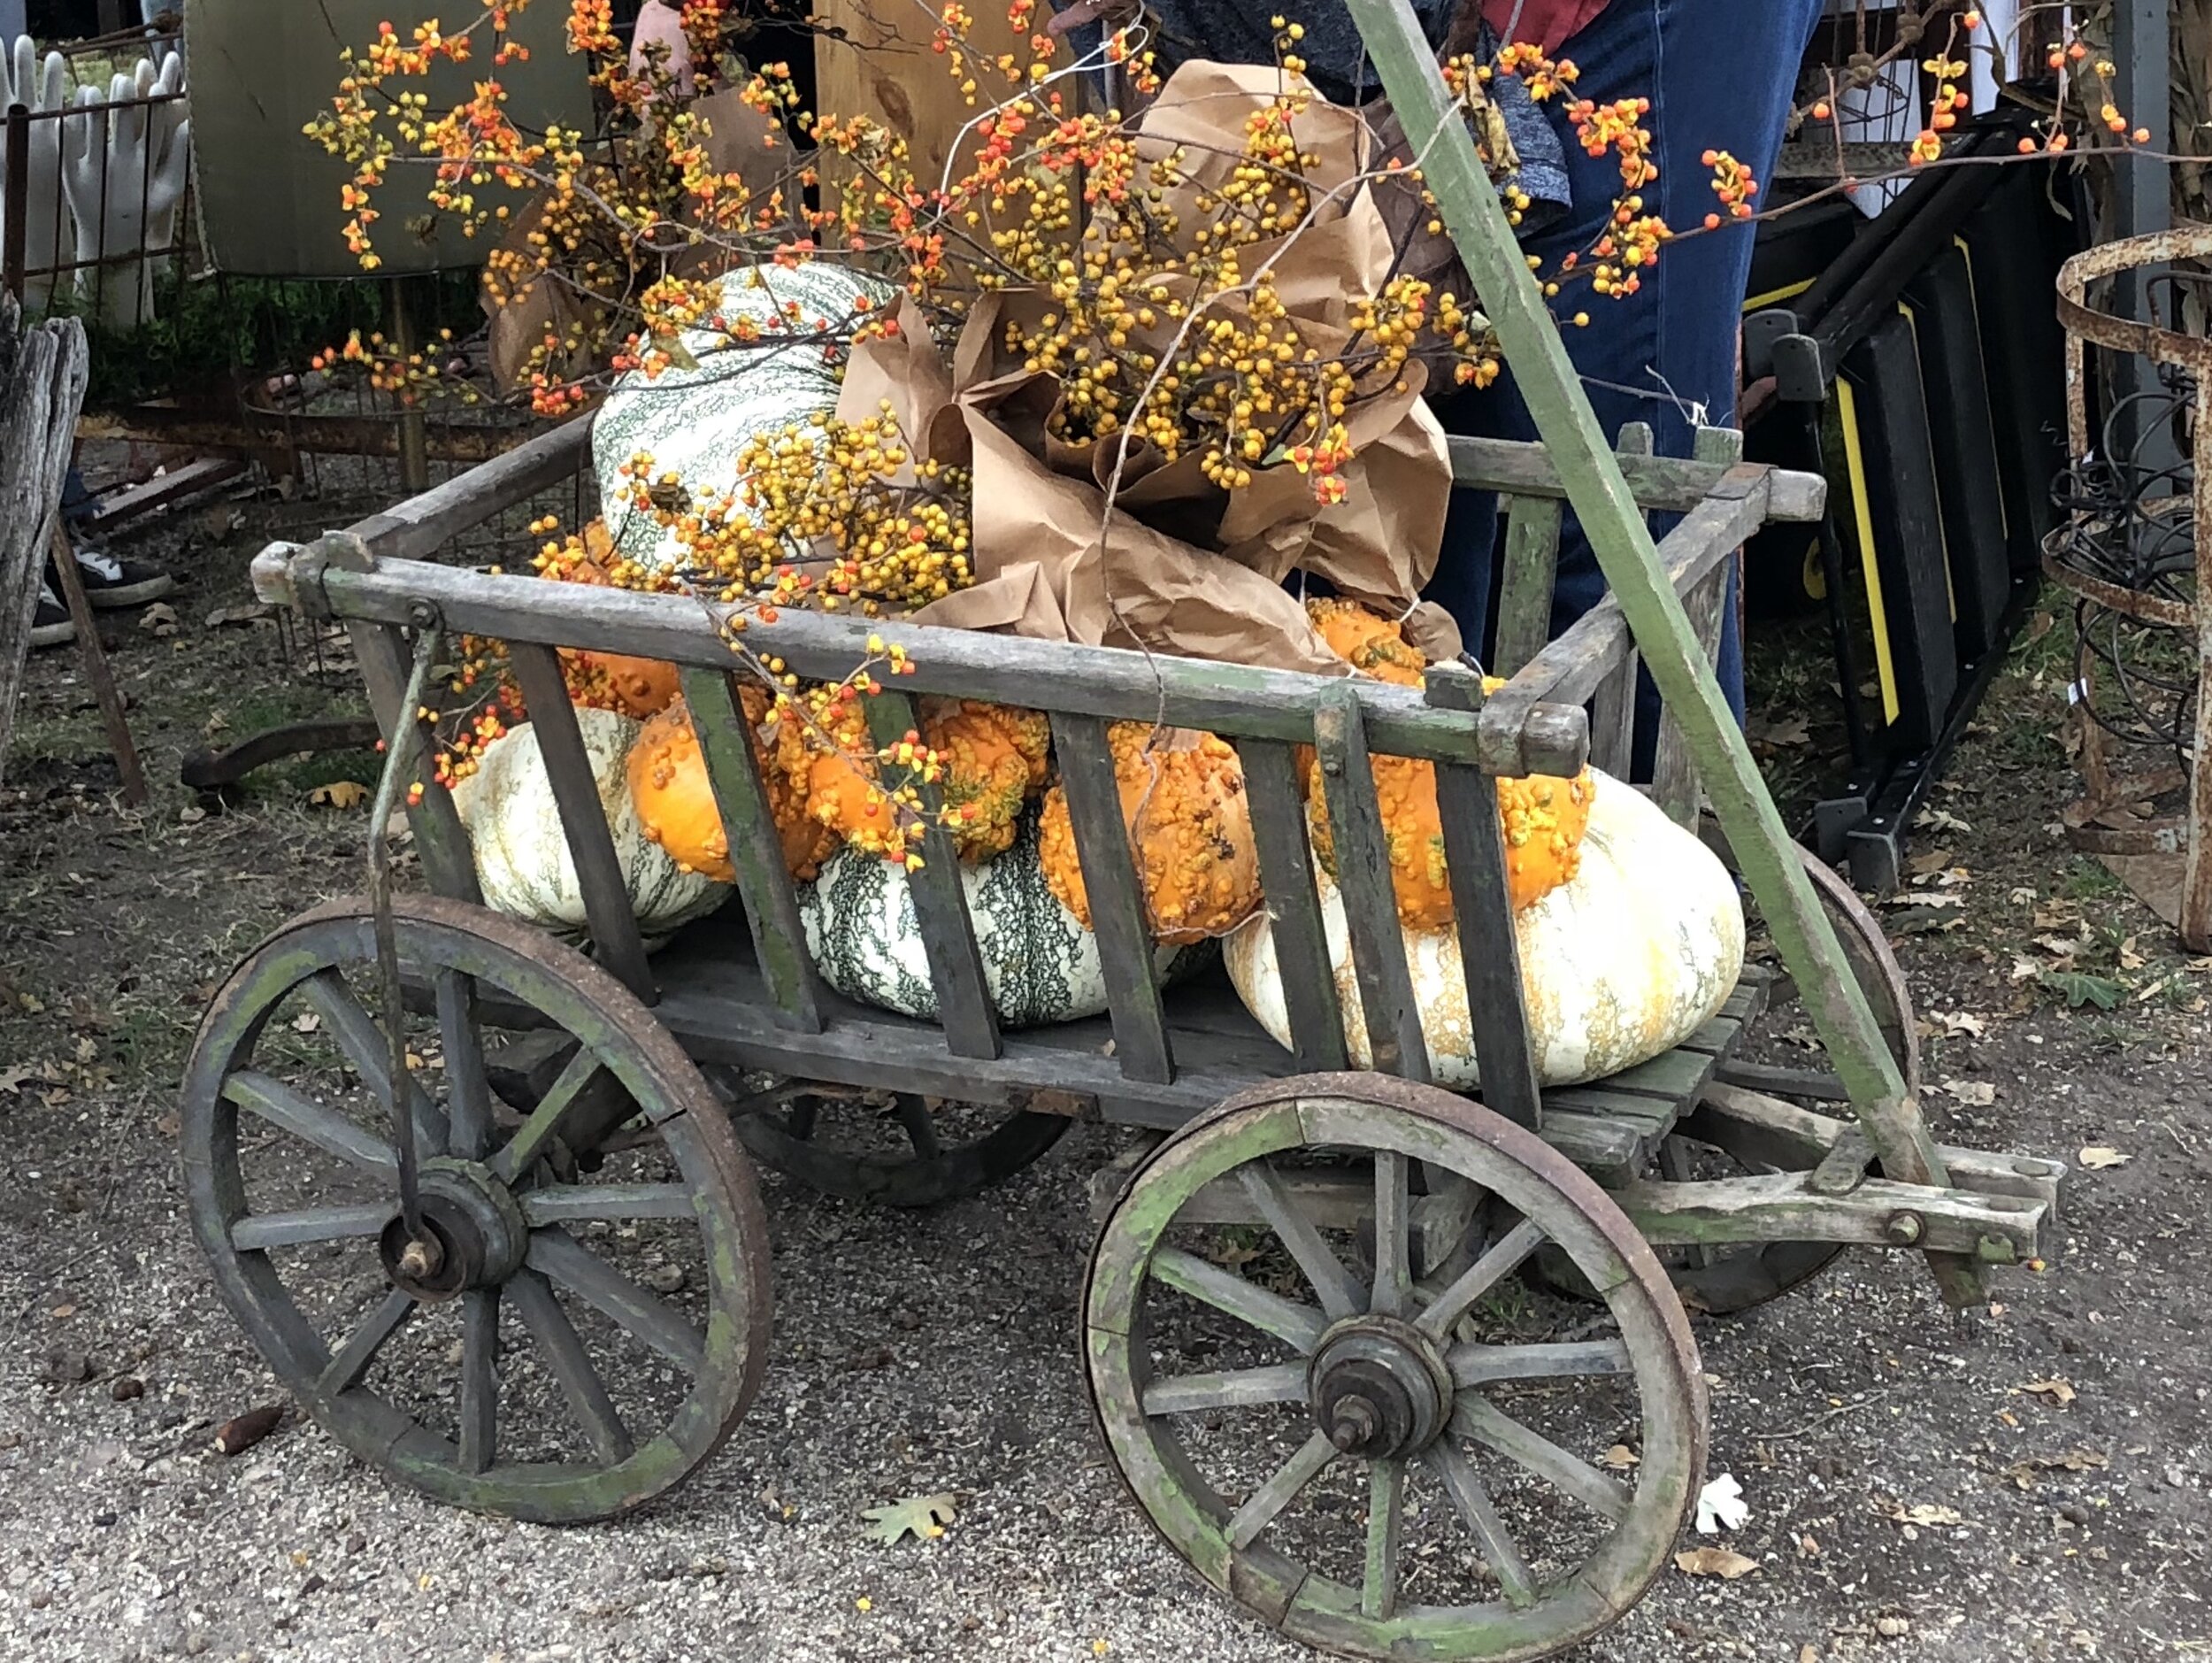 Goat Cart Filled with Pumpkins and Autumn Decor (Copy)